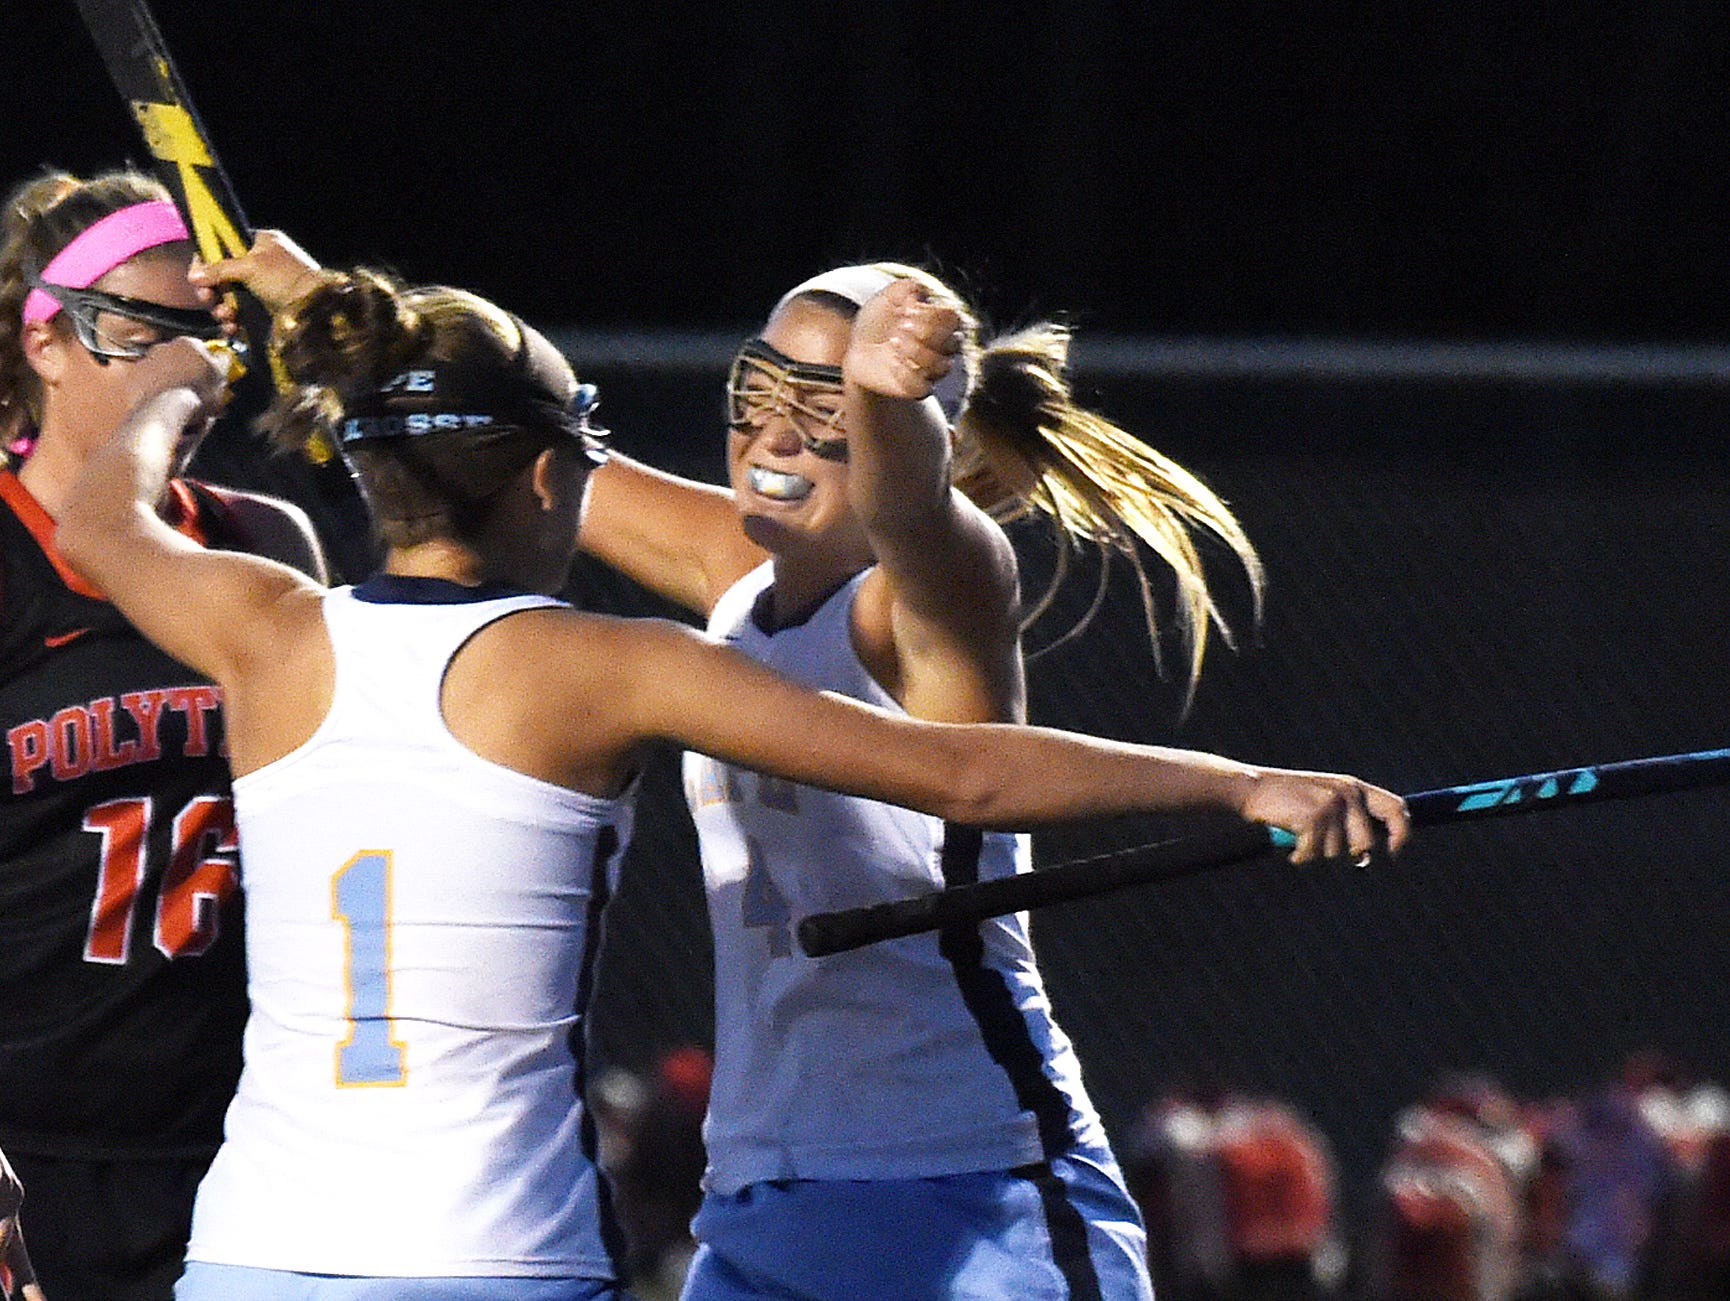 Capes Sydney Ostroski celebrates after scoring as Cape Henlopen HS (white) hosted Polytech HS (black) in Varsity Field Hockey at Champions Stadium at the school near Lewes on Thursday October 22.